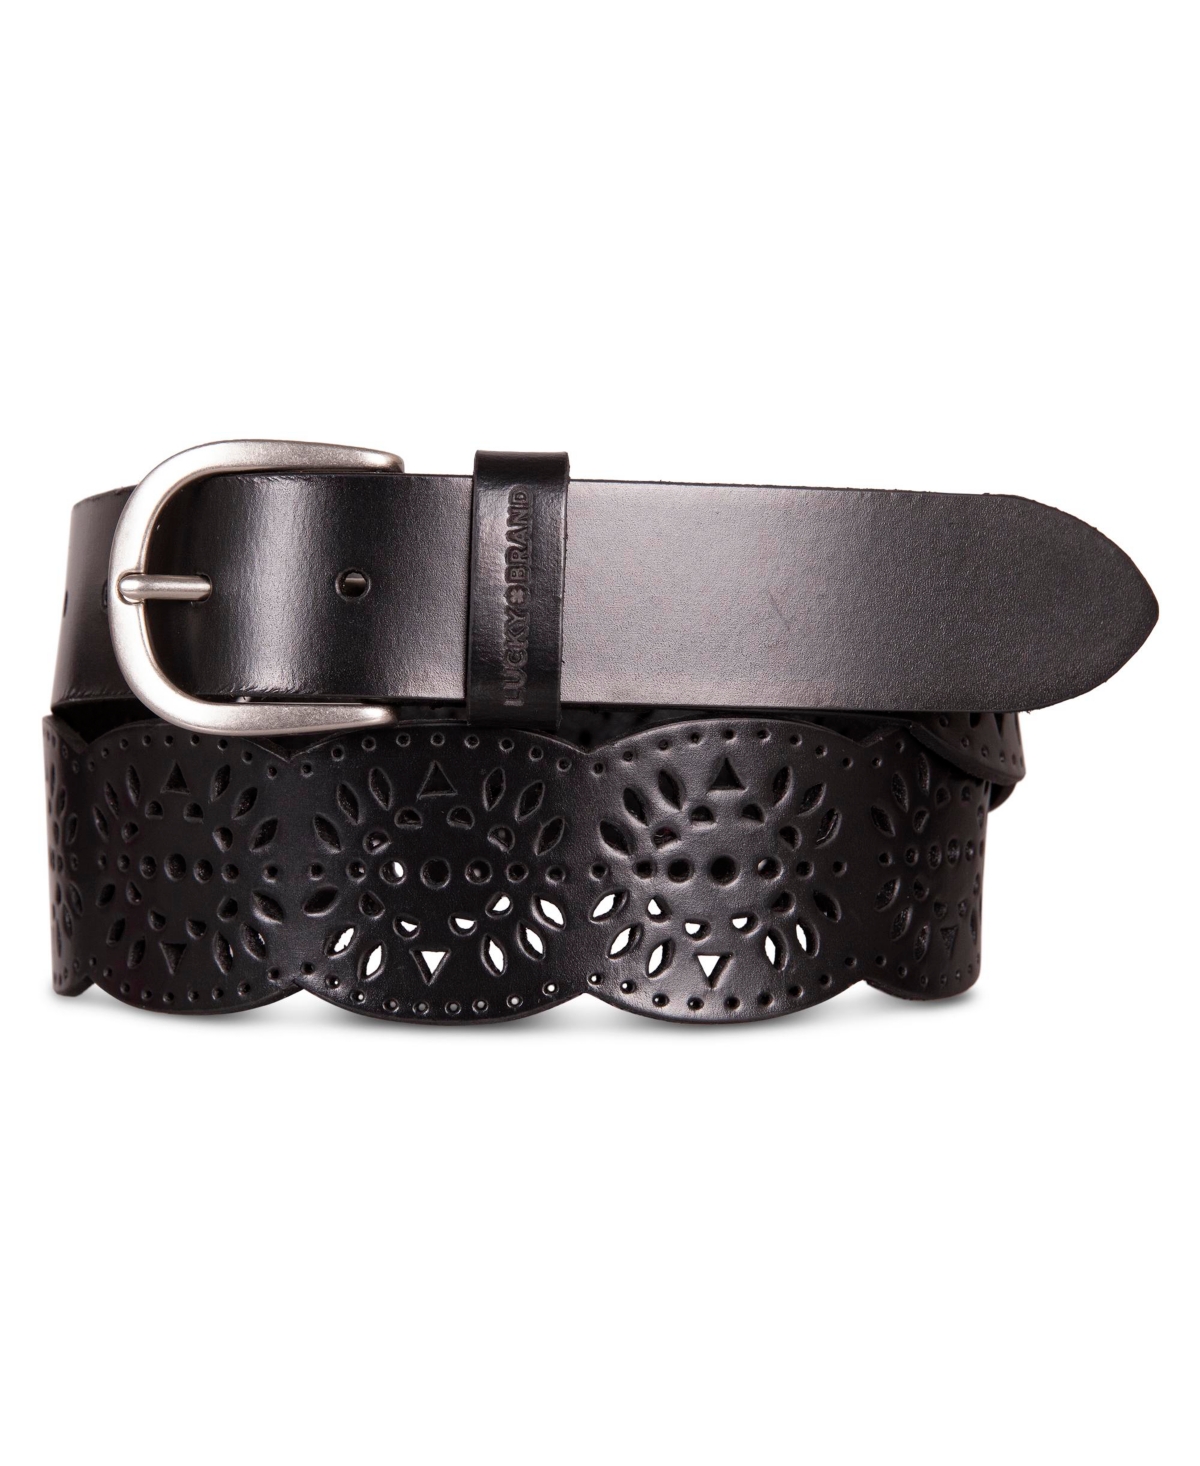 Women's Perforated Scalloped Edge Leather Belt - Black